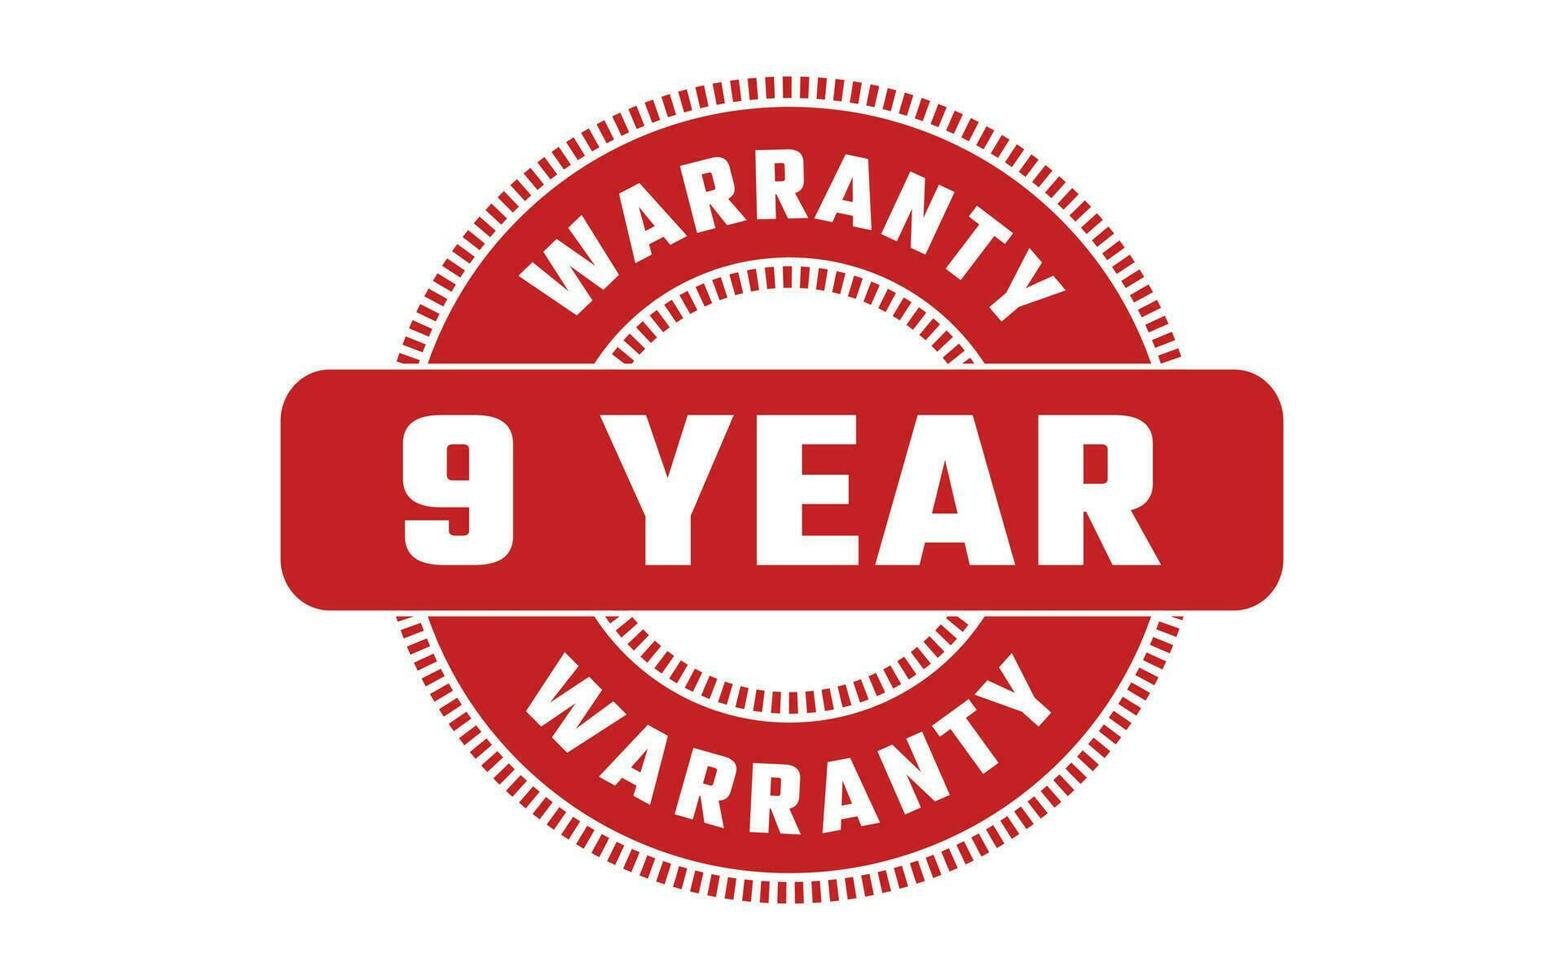 9 Year Warranty Rubber Stamp vector